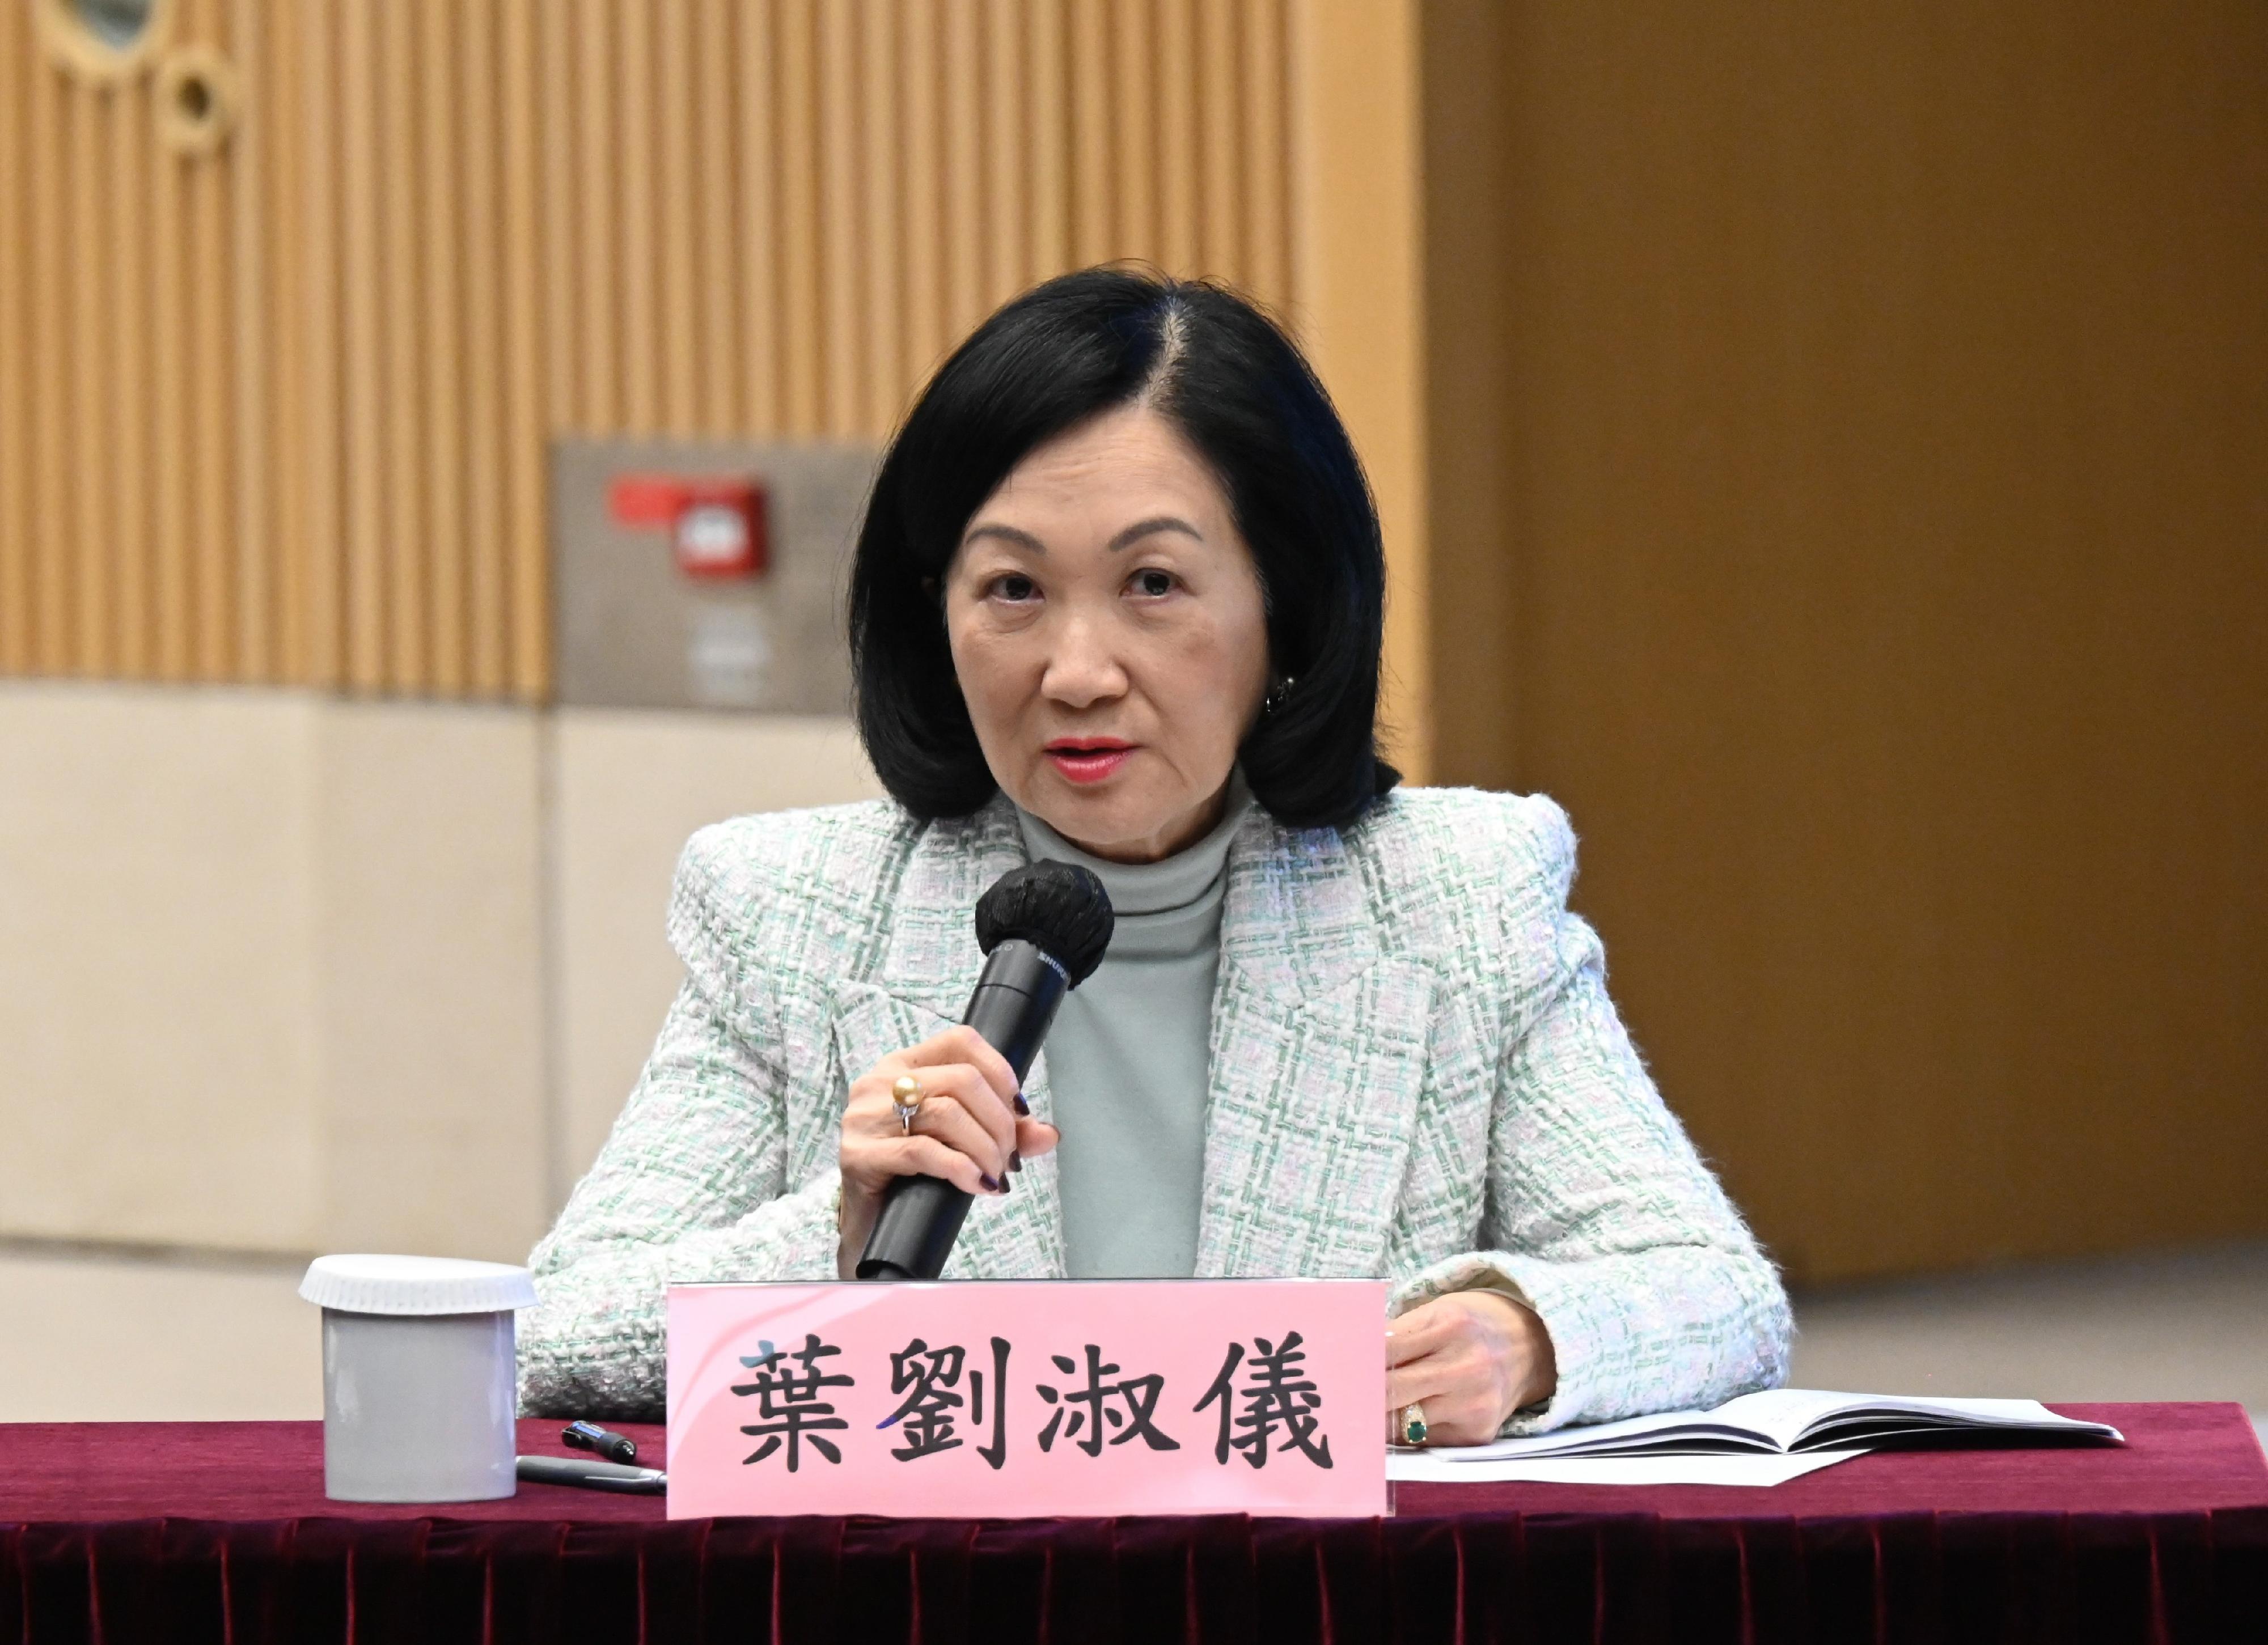 The Hong Kong Special Administrative Region Government today (March 28) held a seminar on learning and implementing the spirit of the “two sessions” at the Central Government Offices. Photo shows the Convenor of the Non-official Members of the Executive Council, Mrs Regina Ip, sharing her views.